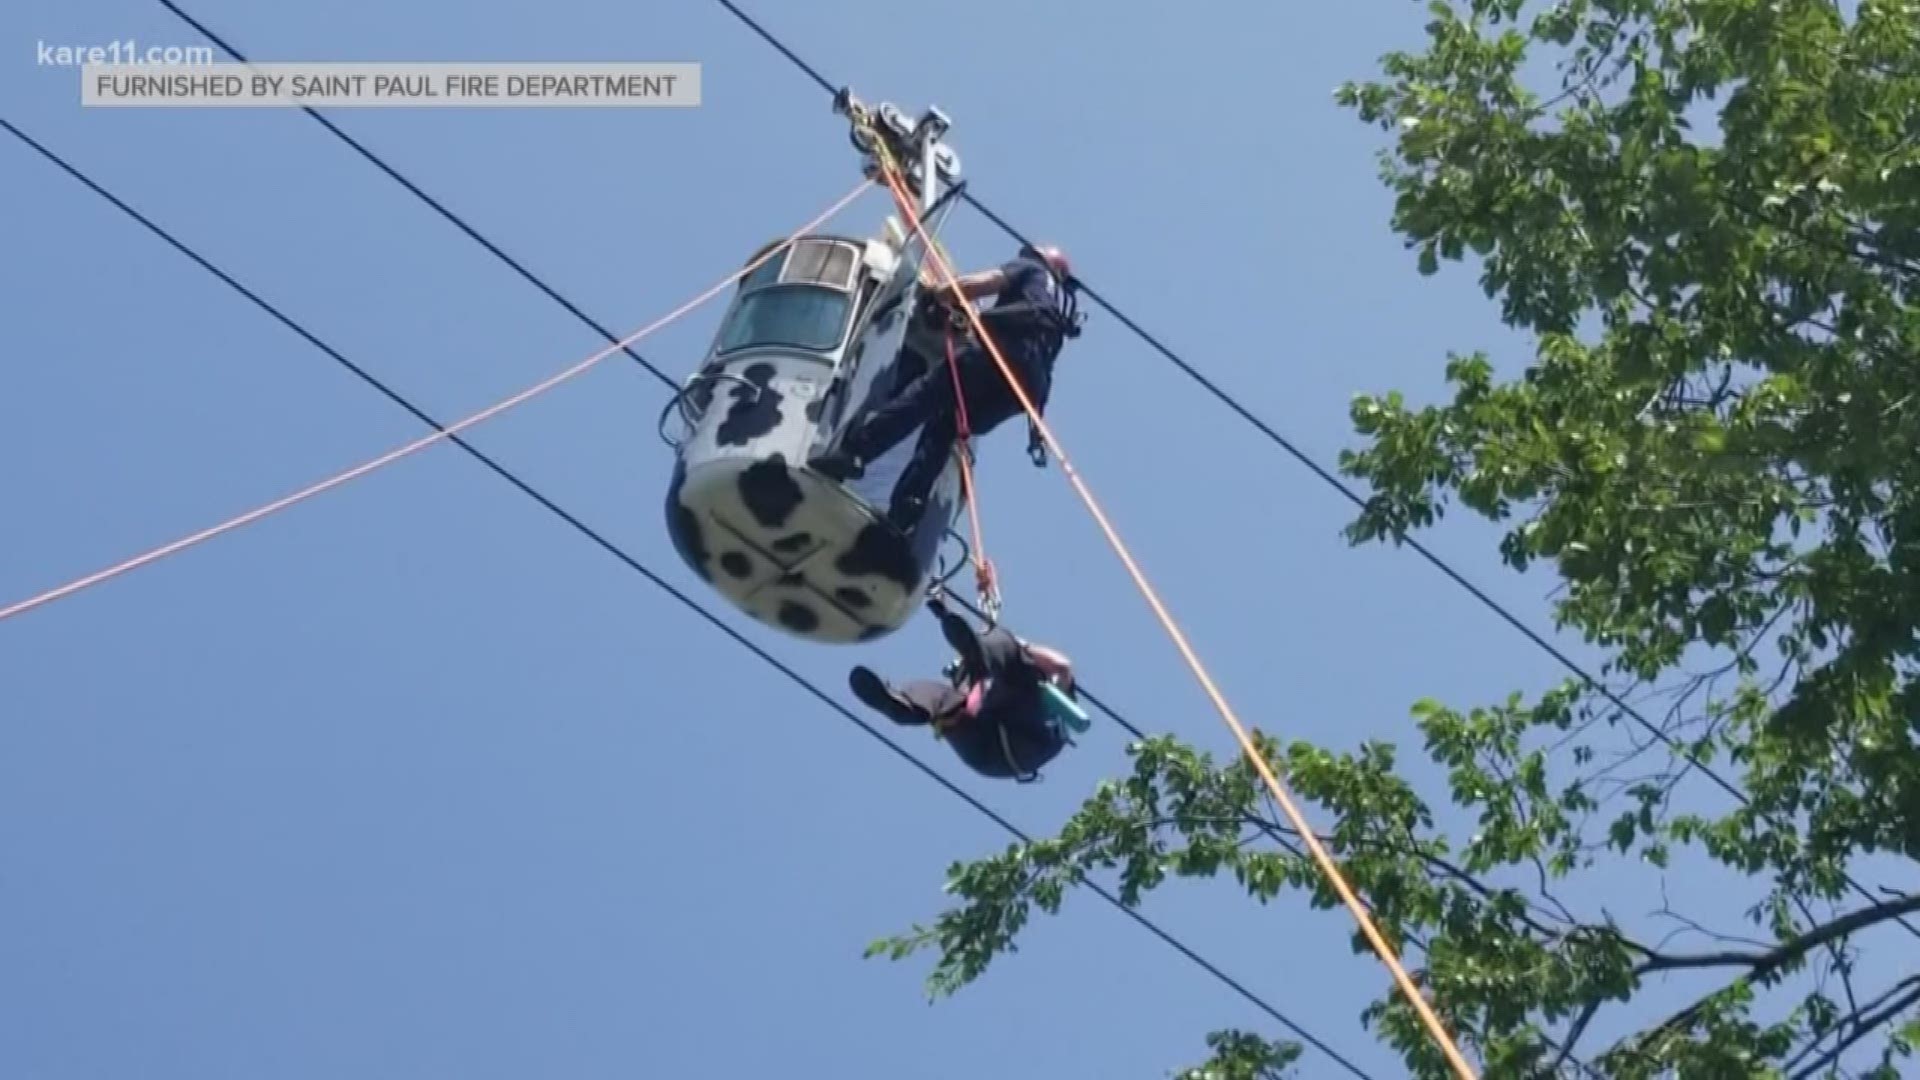 Lots of preparations before the Minnesota State Fair. Heidi Wigdahl talked to the Saint Paul Fire Department about their advanced technical rescue team's recent training.